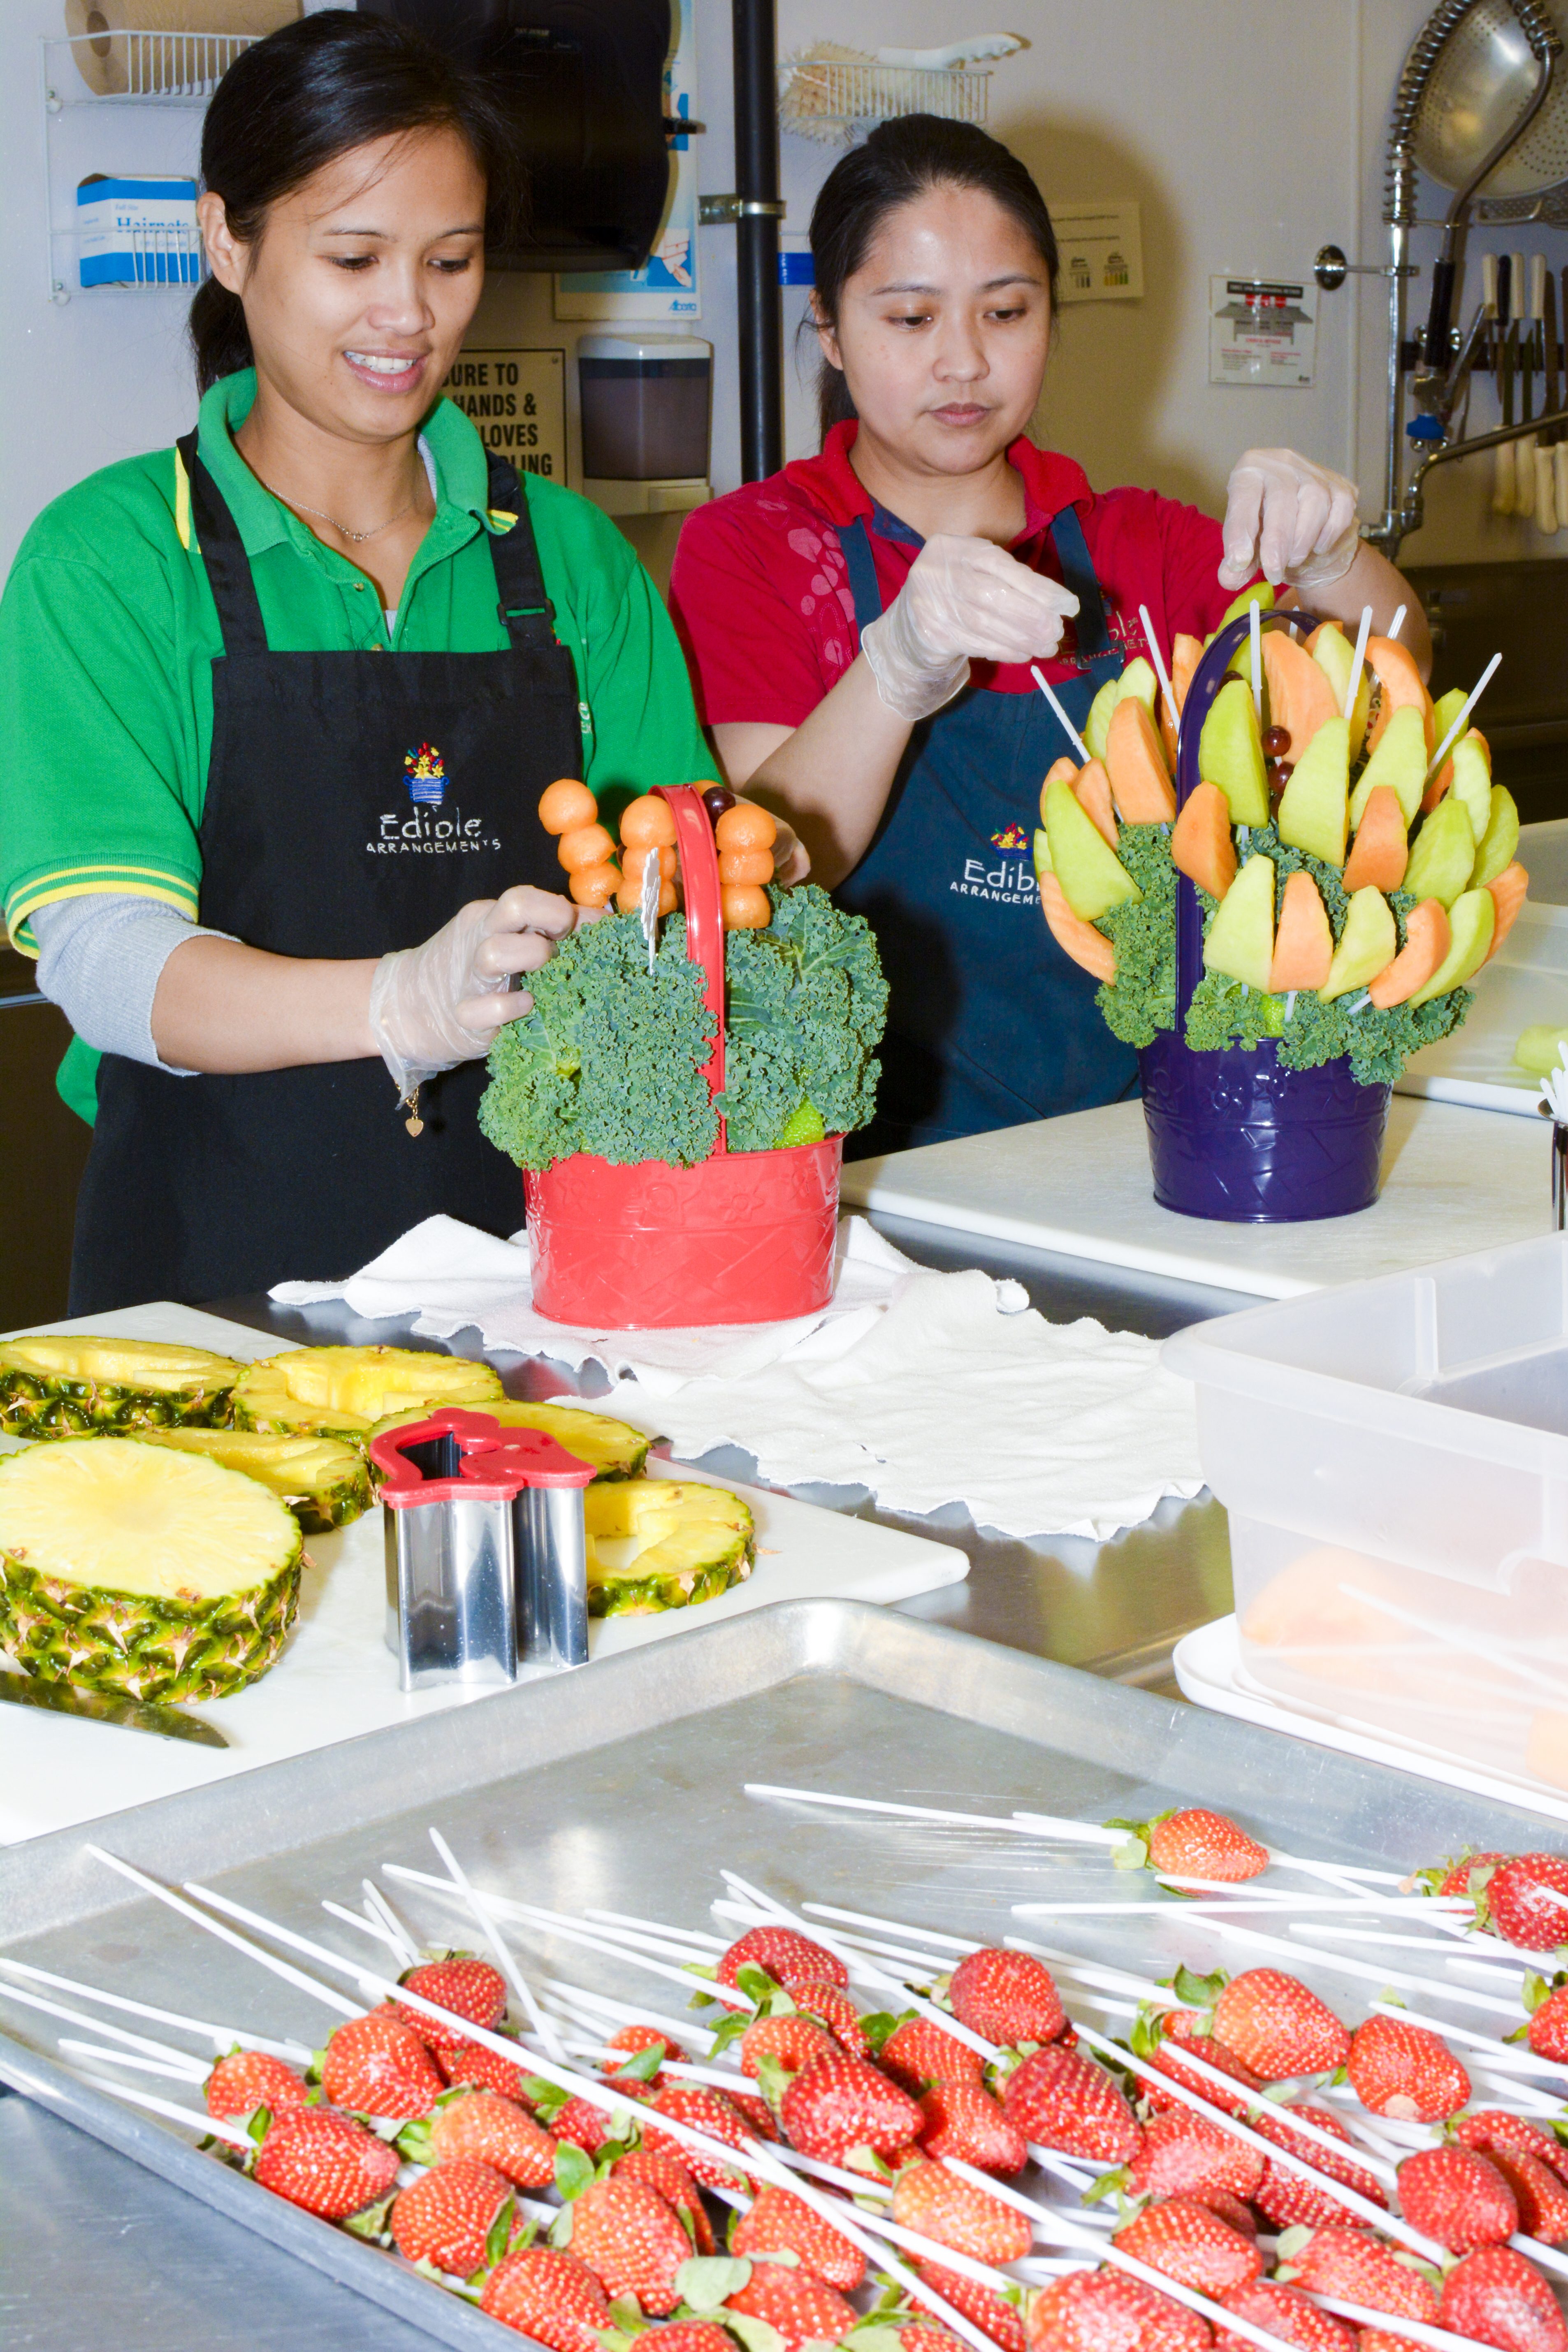 BEHIND THE SCENES – Lucita Alipor and Judith Mitra give a behind the scenes peak at how an Edible Arrangement treat is made.